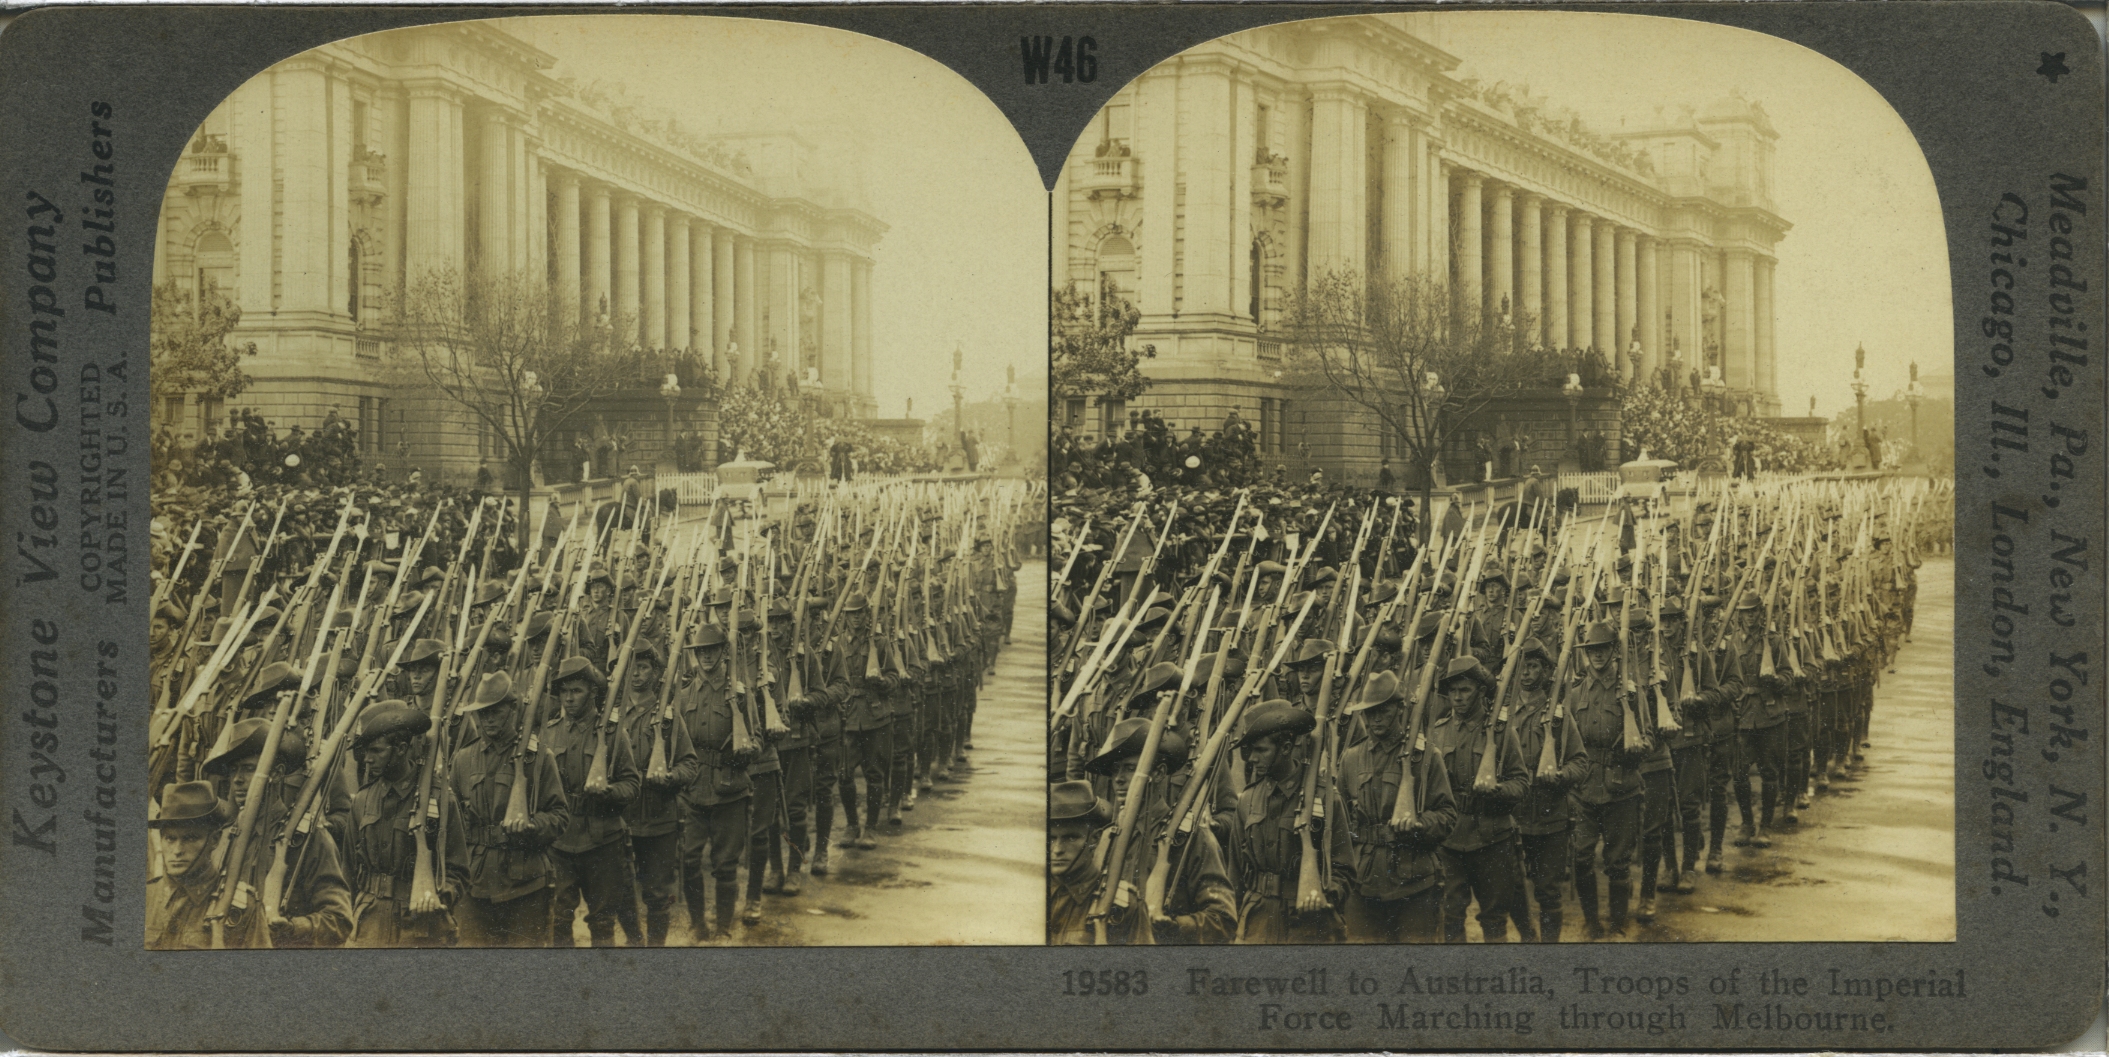 Farewell to Australia, Troops of the Imperial Force Marching through Melbourne